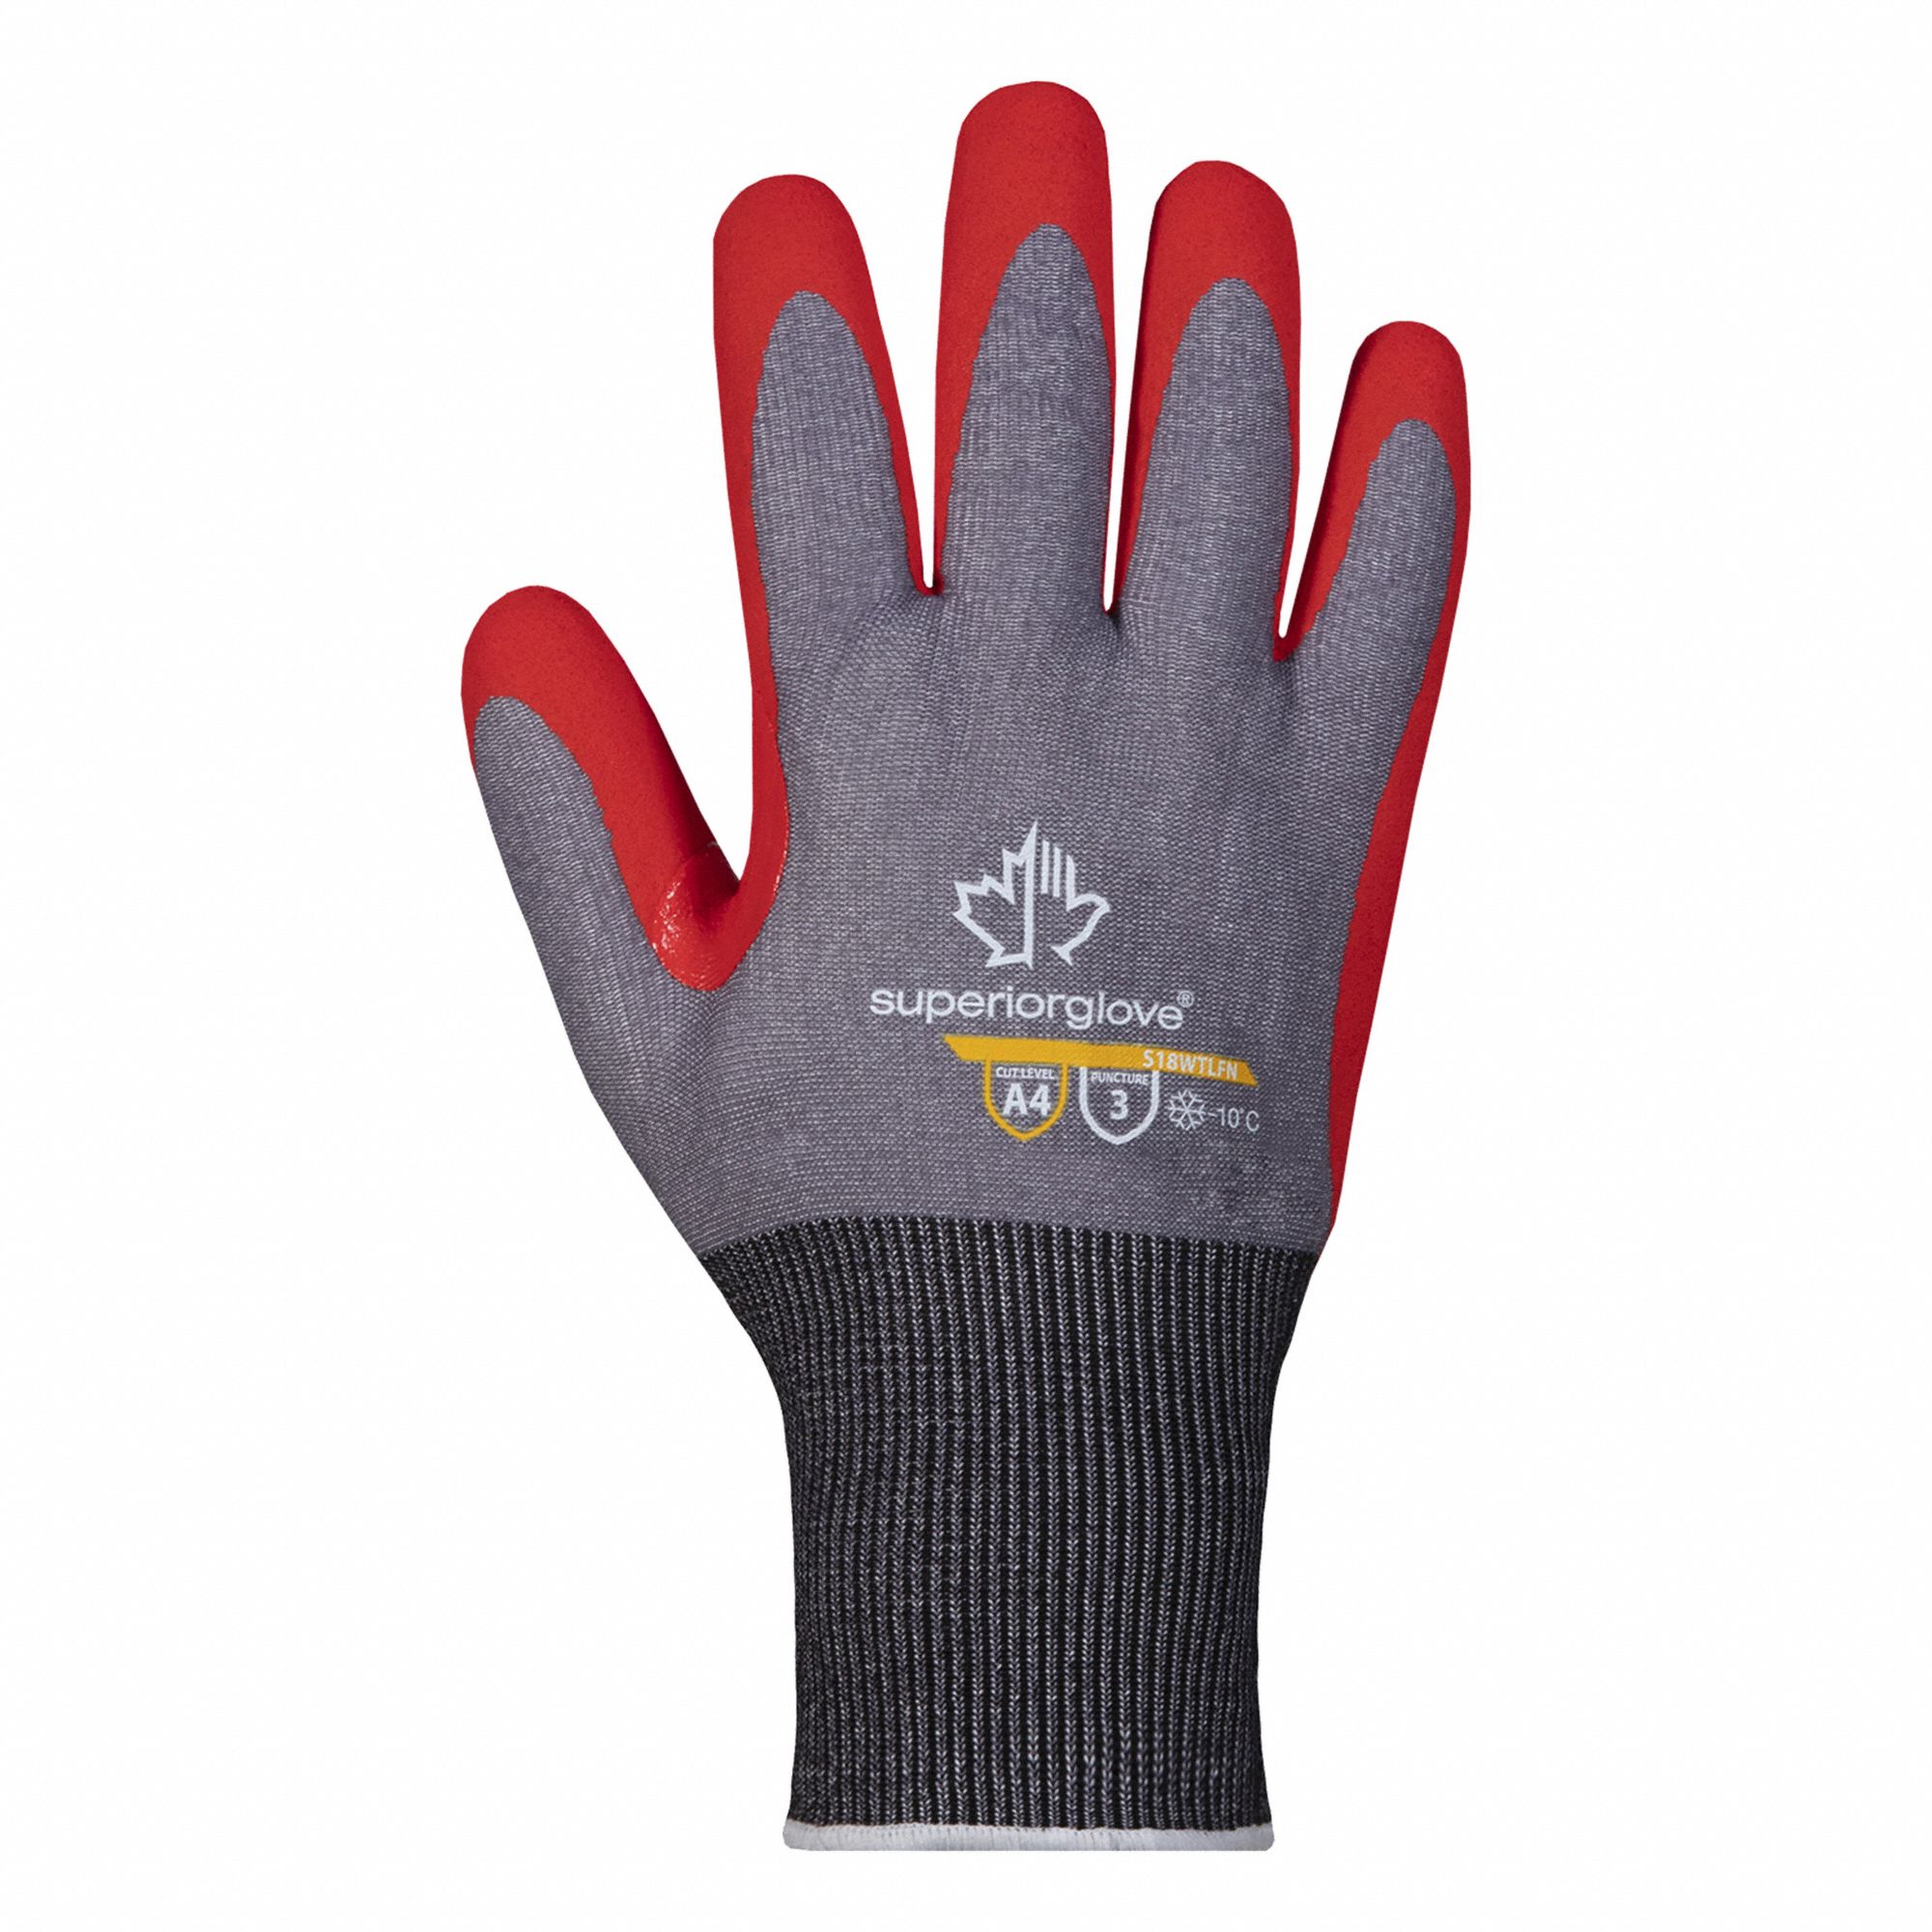 SUPERIOR GLOVE WATERPROOF CUT-RESISTANT GLOVES, XL, 18 GA, KNITTED CUFF -  Knit Cold-Condition Insulated Gloves - SUGS18WTLFN10